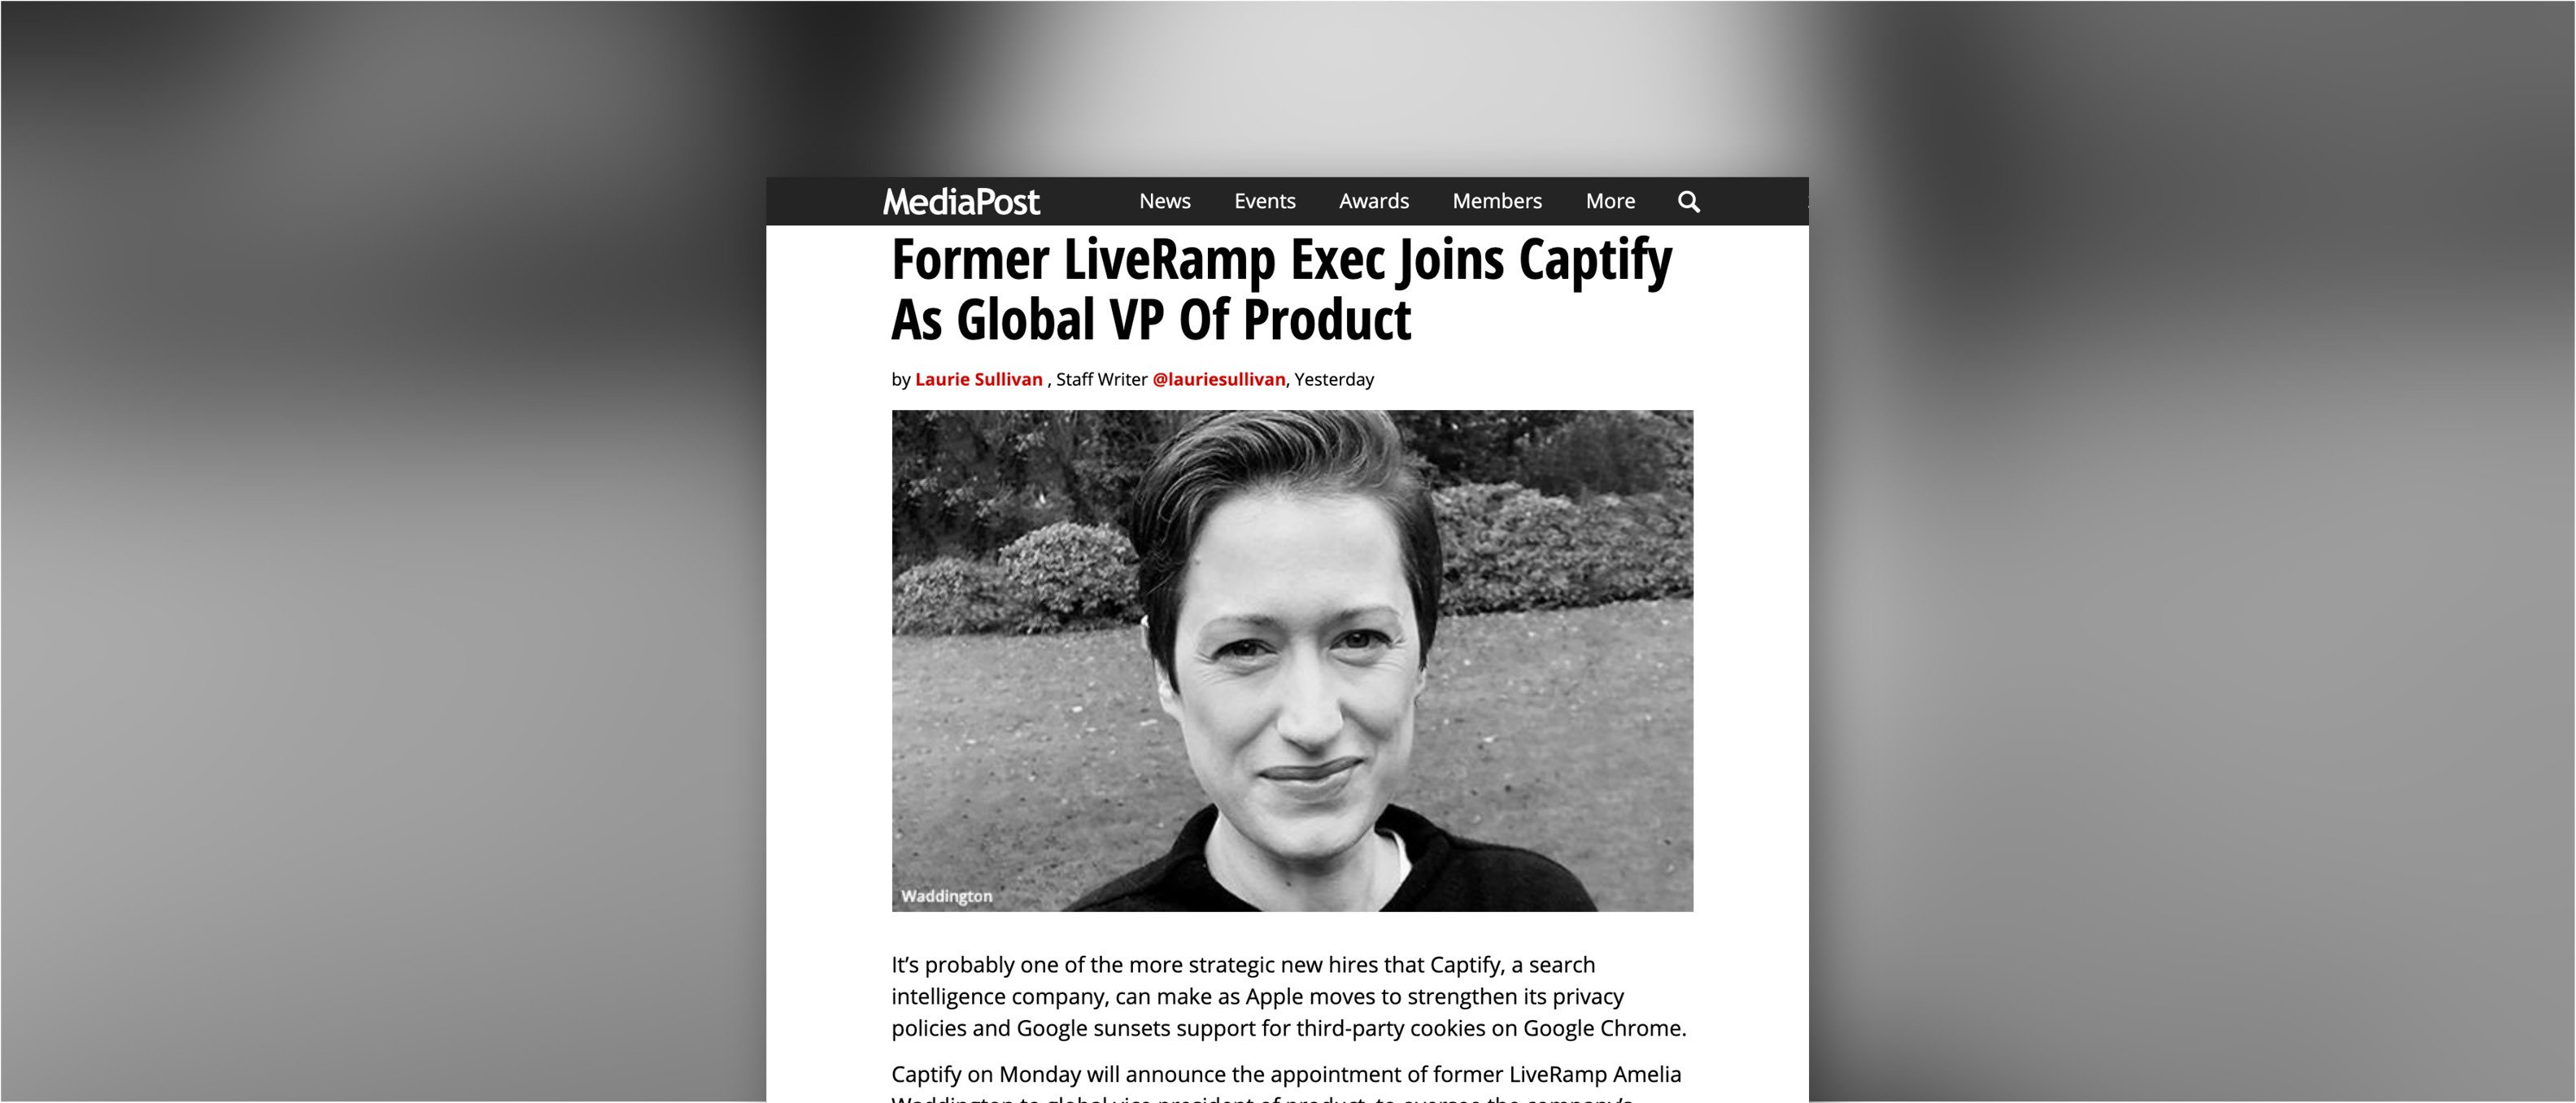 MediaPost: Former LiveRamp Exec Joins Captify As Global VP Of Product